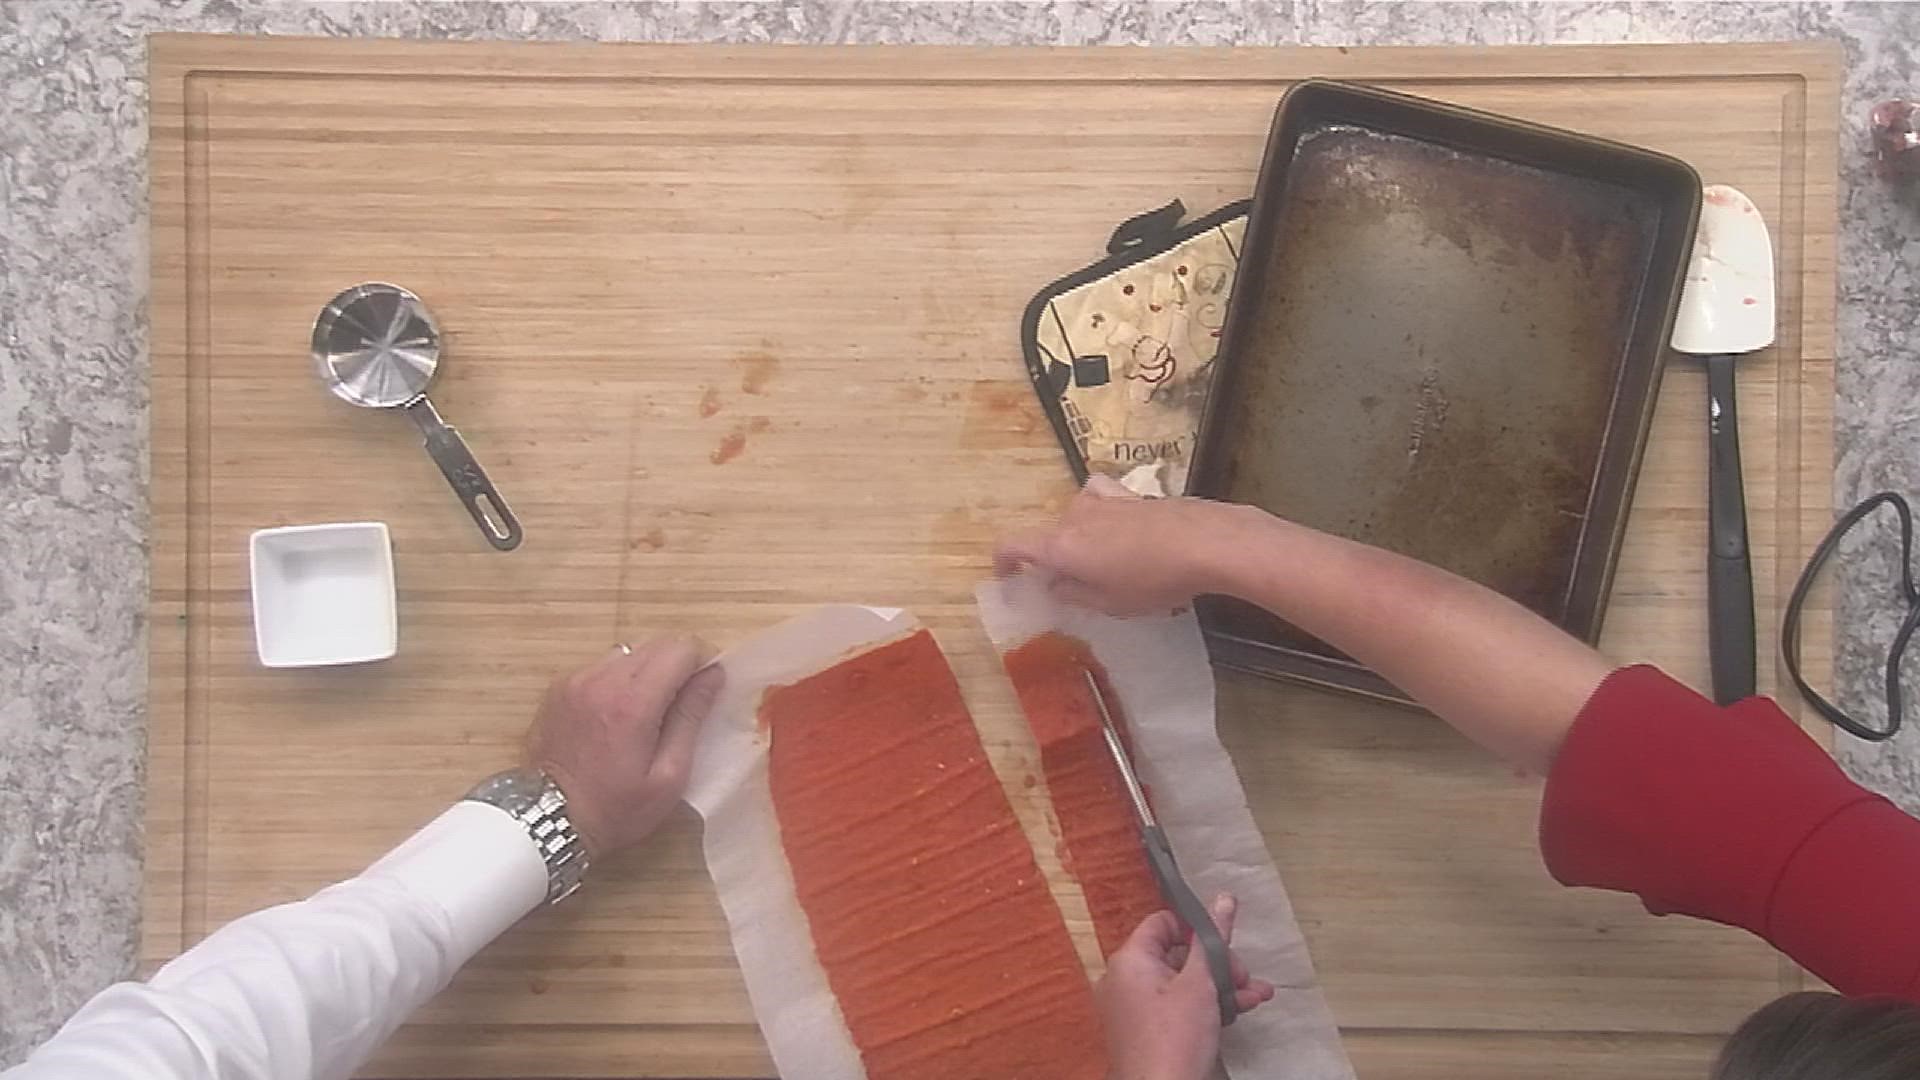 Did you know you can make your own fruit roll-ups? It's easy to do!